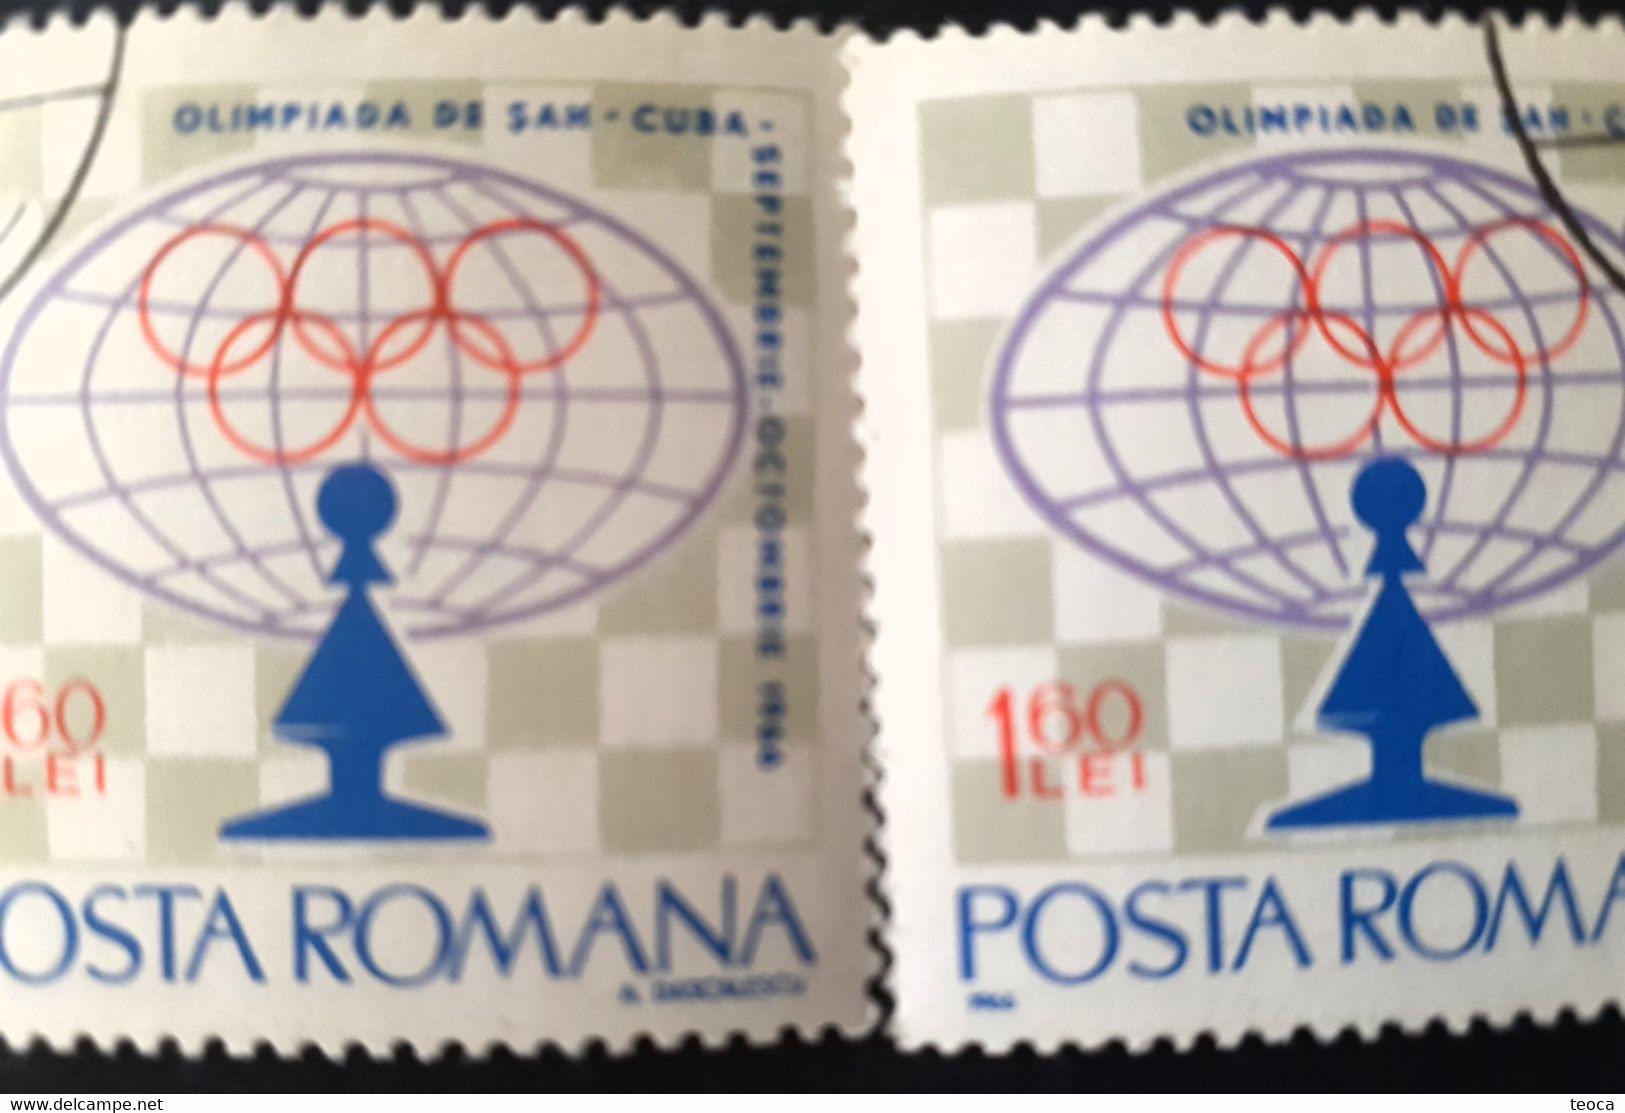 Stamps Errors Chess Romania 1966 MI 2482 Printed With Misplaced Chess Piece Used - Errors, Freaks & Oddities (EFO)